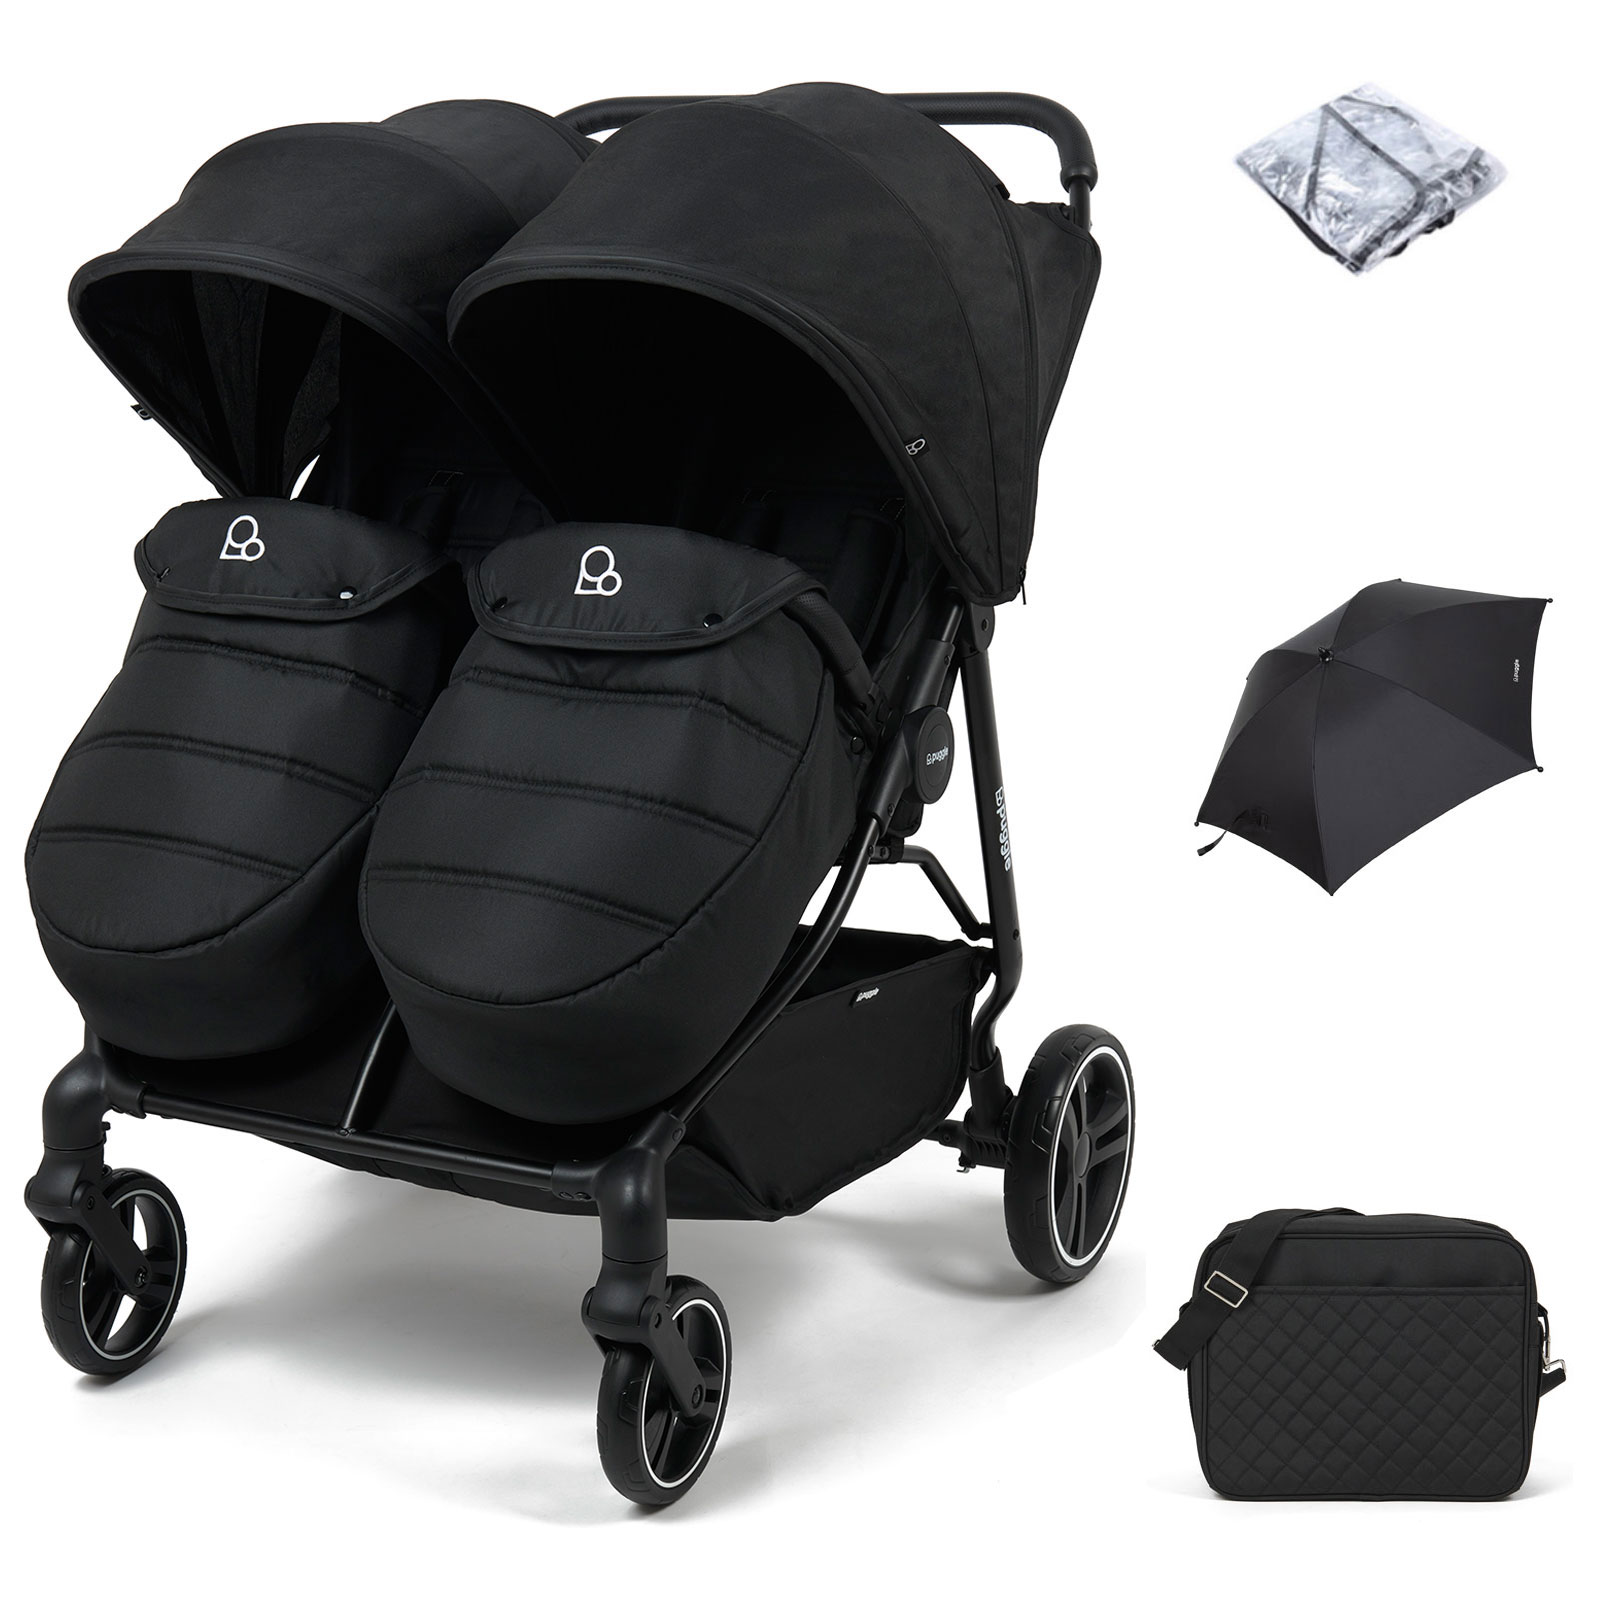 Puggle Urban City Easyfold Twin Pushchair with Footmuff, Parasol & Changing Bag - Storm Black